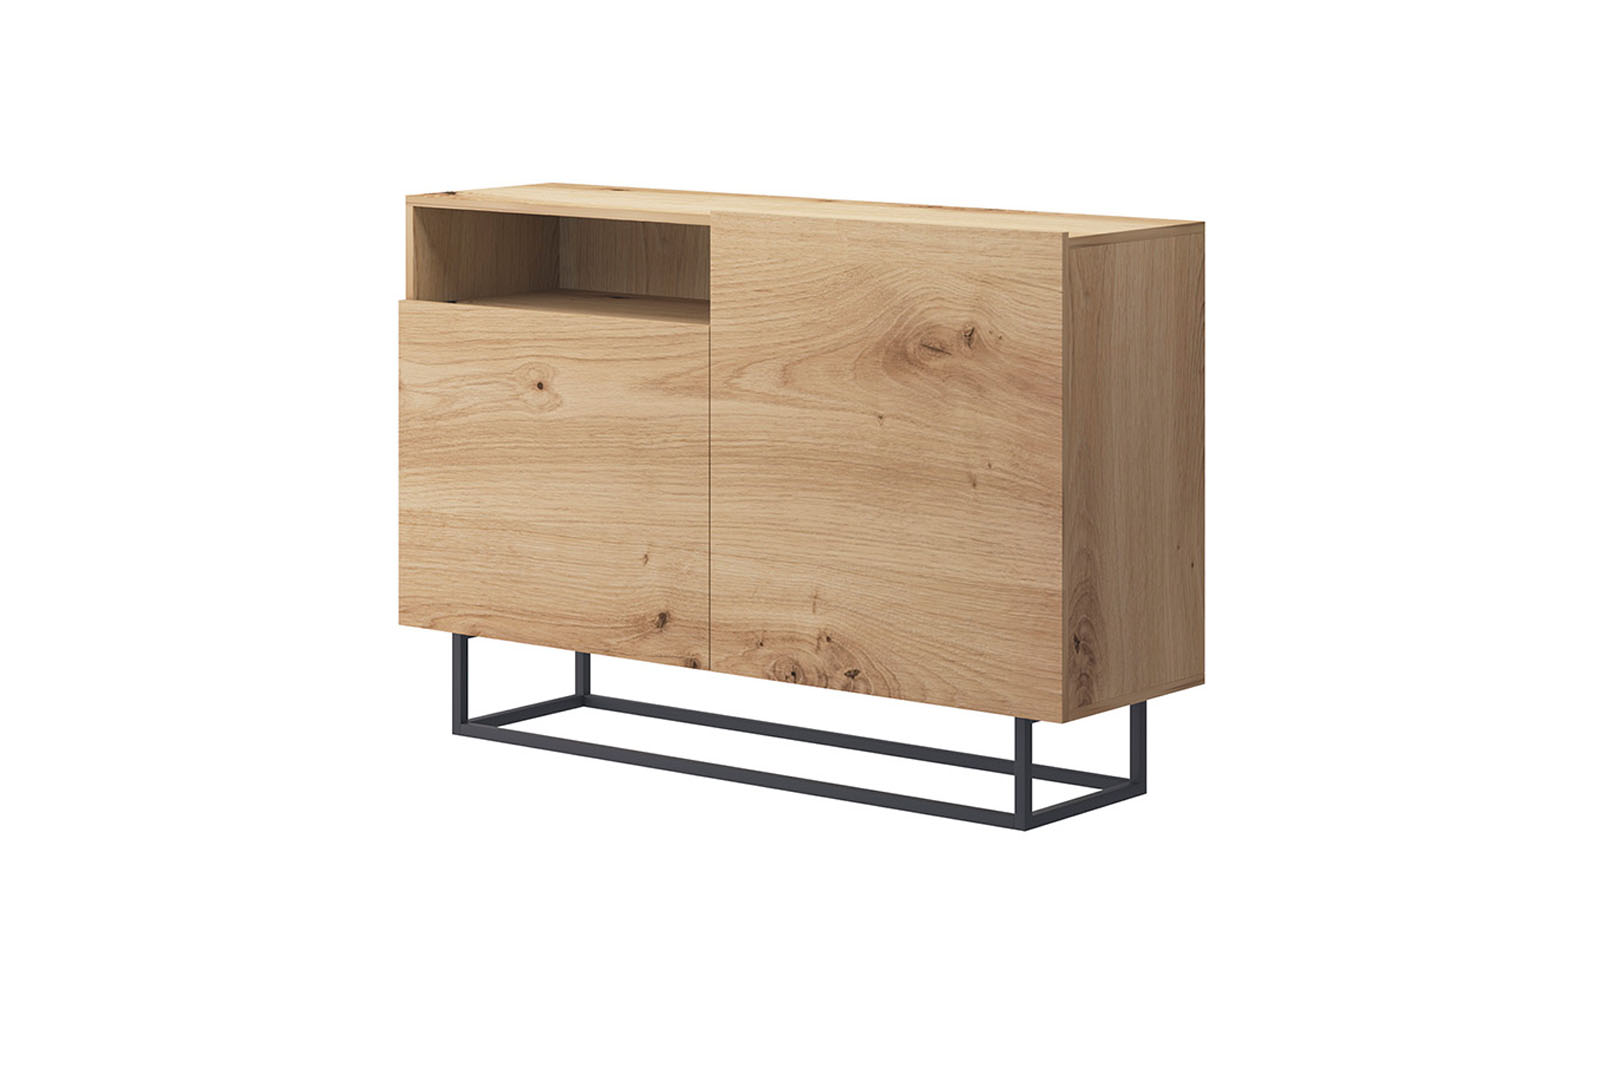 Claude CK120 modern chest of drawers